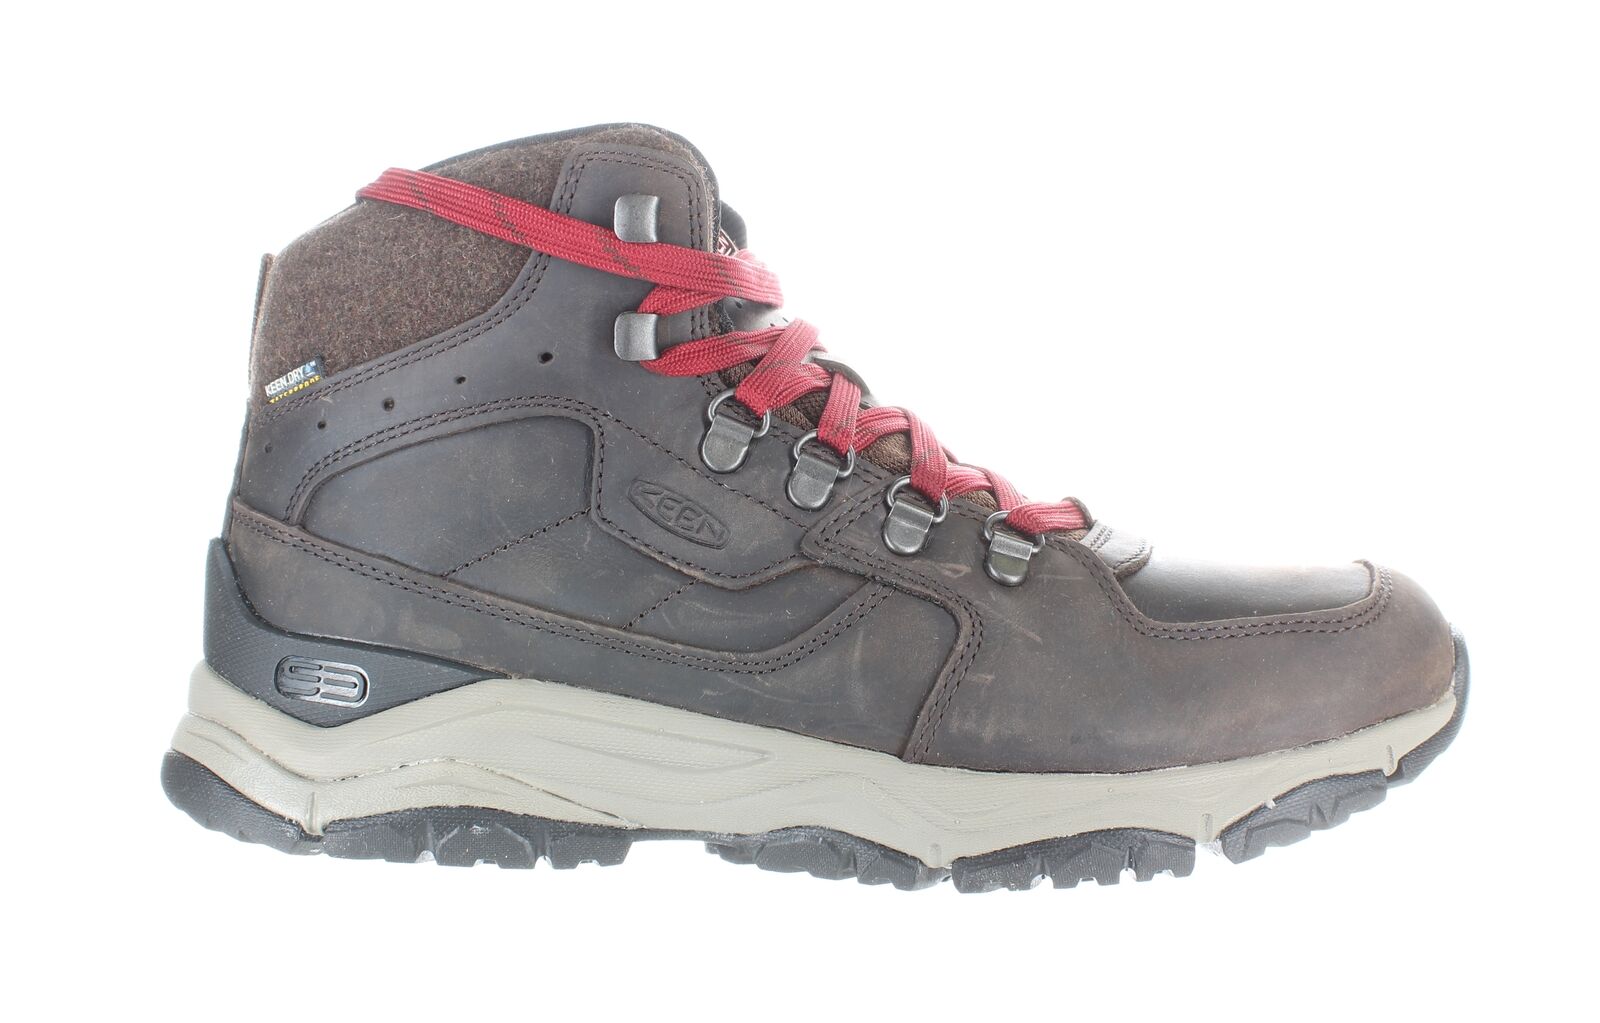 KEEN Womens Innate Chestnut/Red Dahlia Hiking Boots Size 10 (1914868)